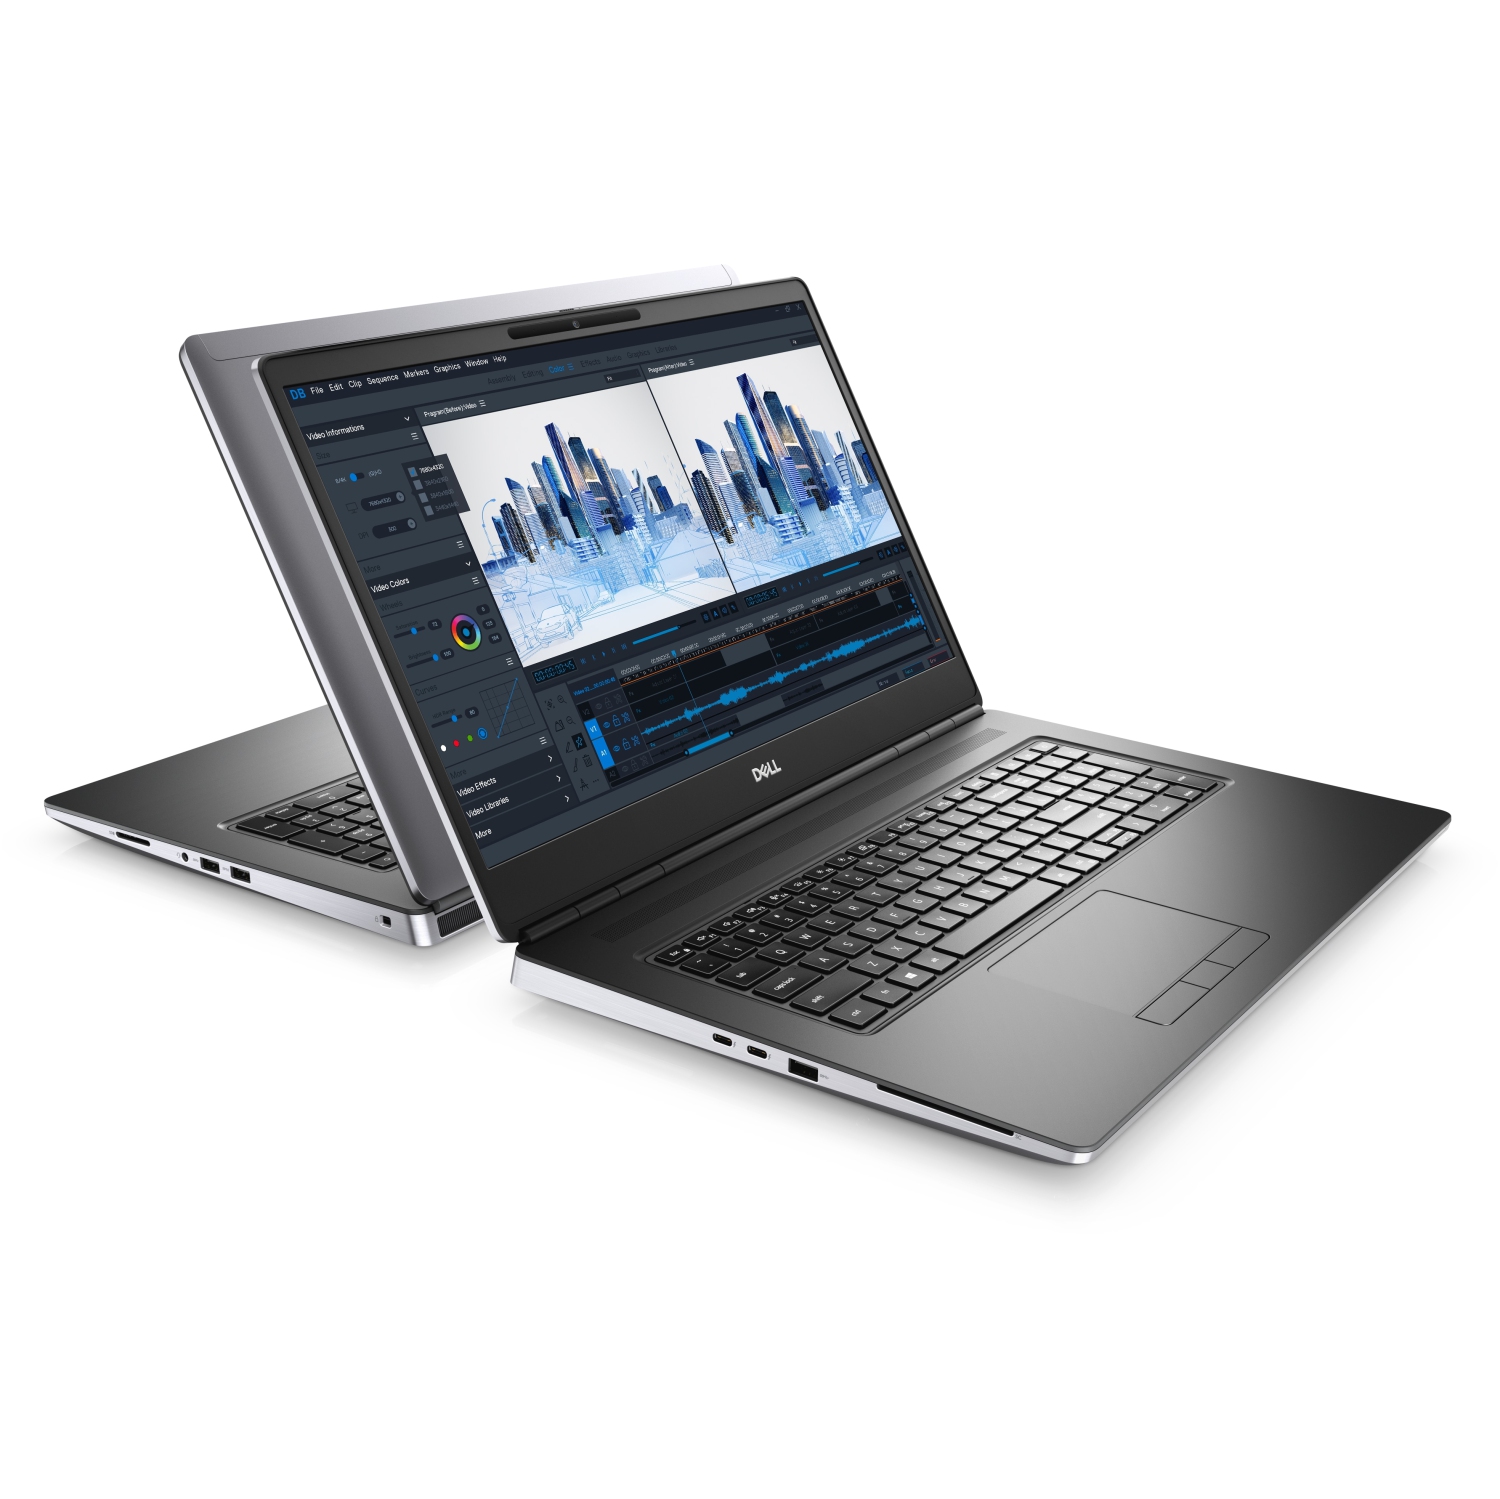 Refurbished (Excellent) - Dell Precision 7000 7760 Workstation Laptop (2021), 17.3" FHD, Core i5, 1TB SSD, 64GB RAM, RTX A5000, 4.6 GHz, 11th Gen CPU Certified